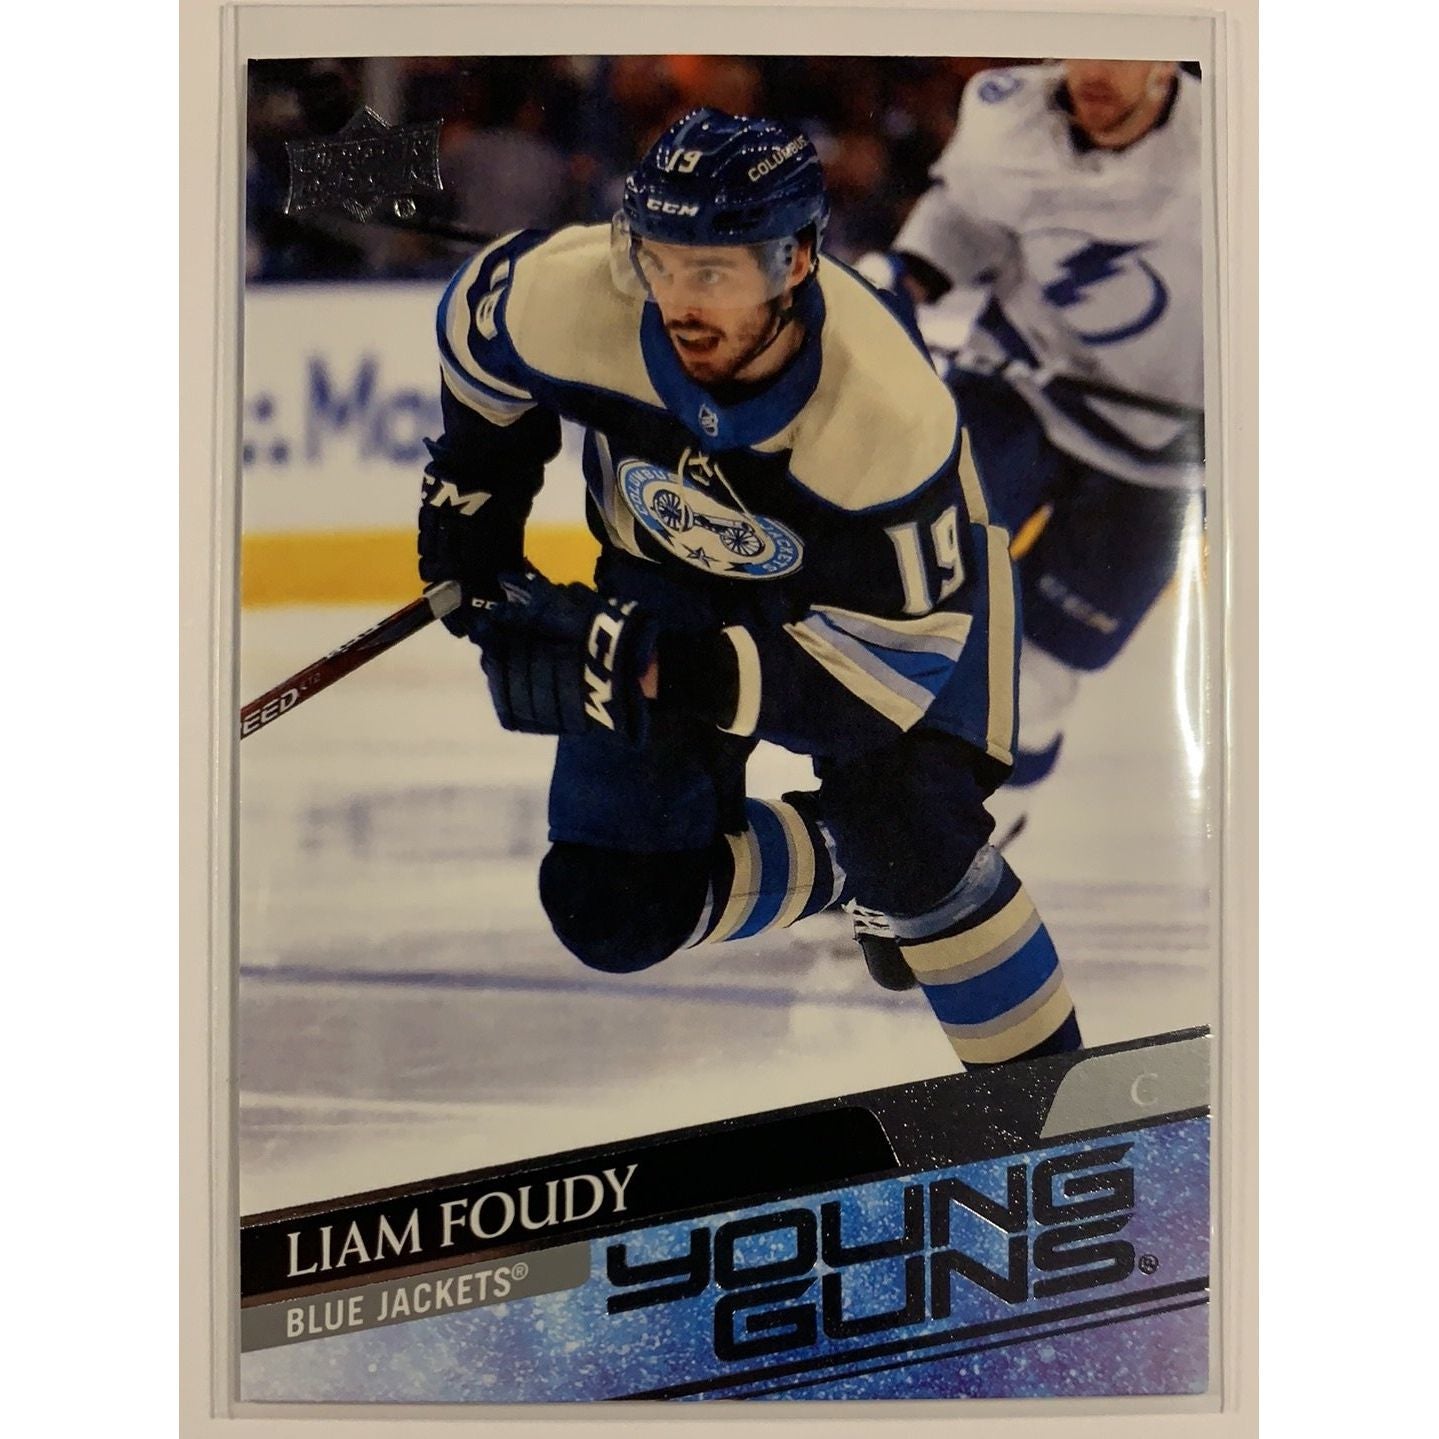  2020-21 Upper Deck Series 1 Liam Foudy Young Guns  Local Legends Cards & Collectibles